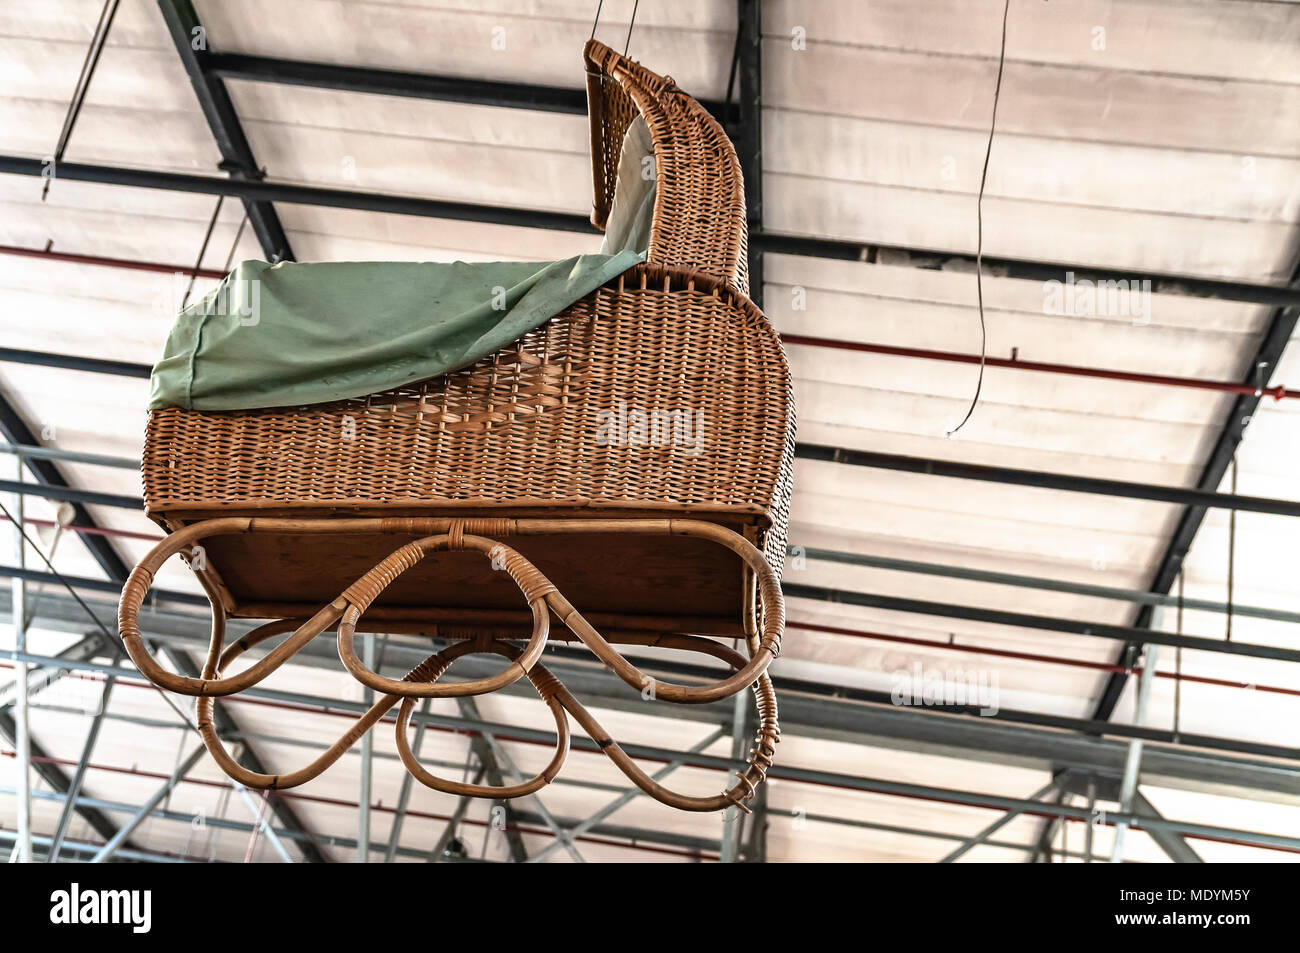 large wicker pram hangs from the ceiling Stock Photo